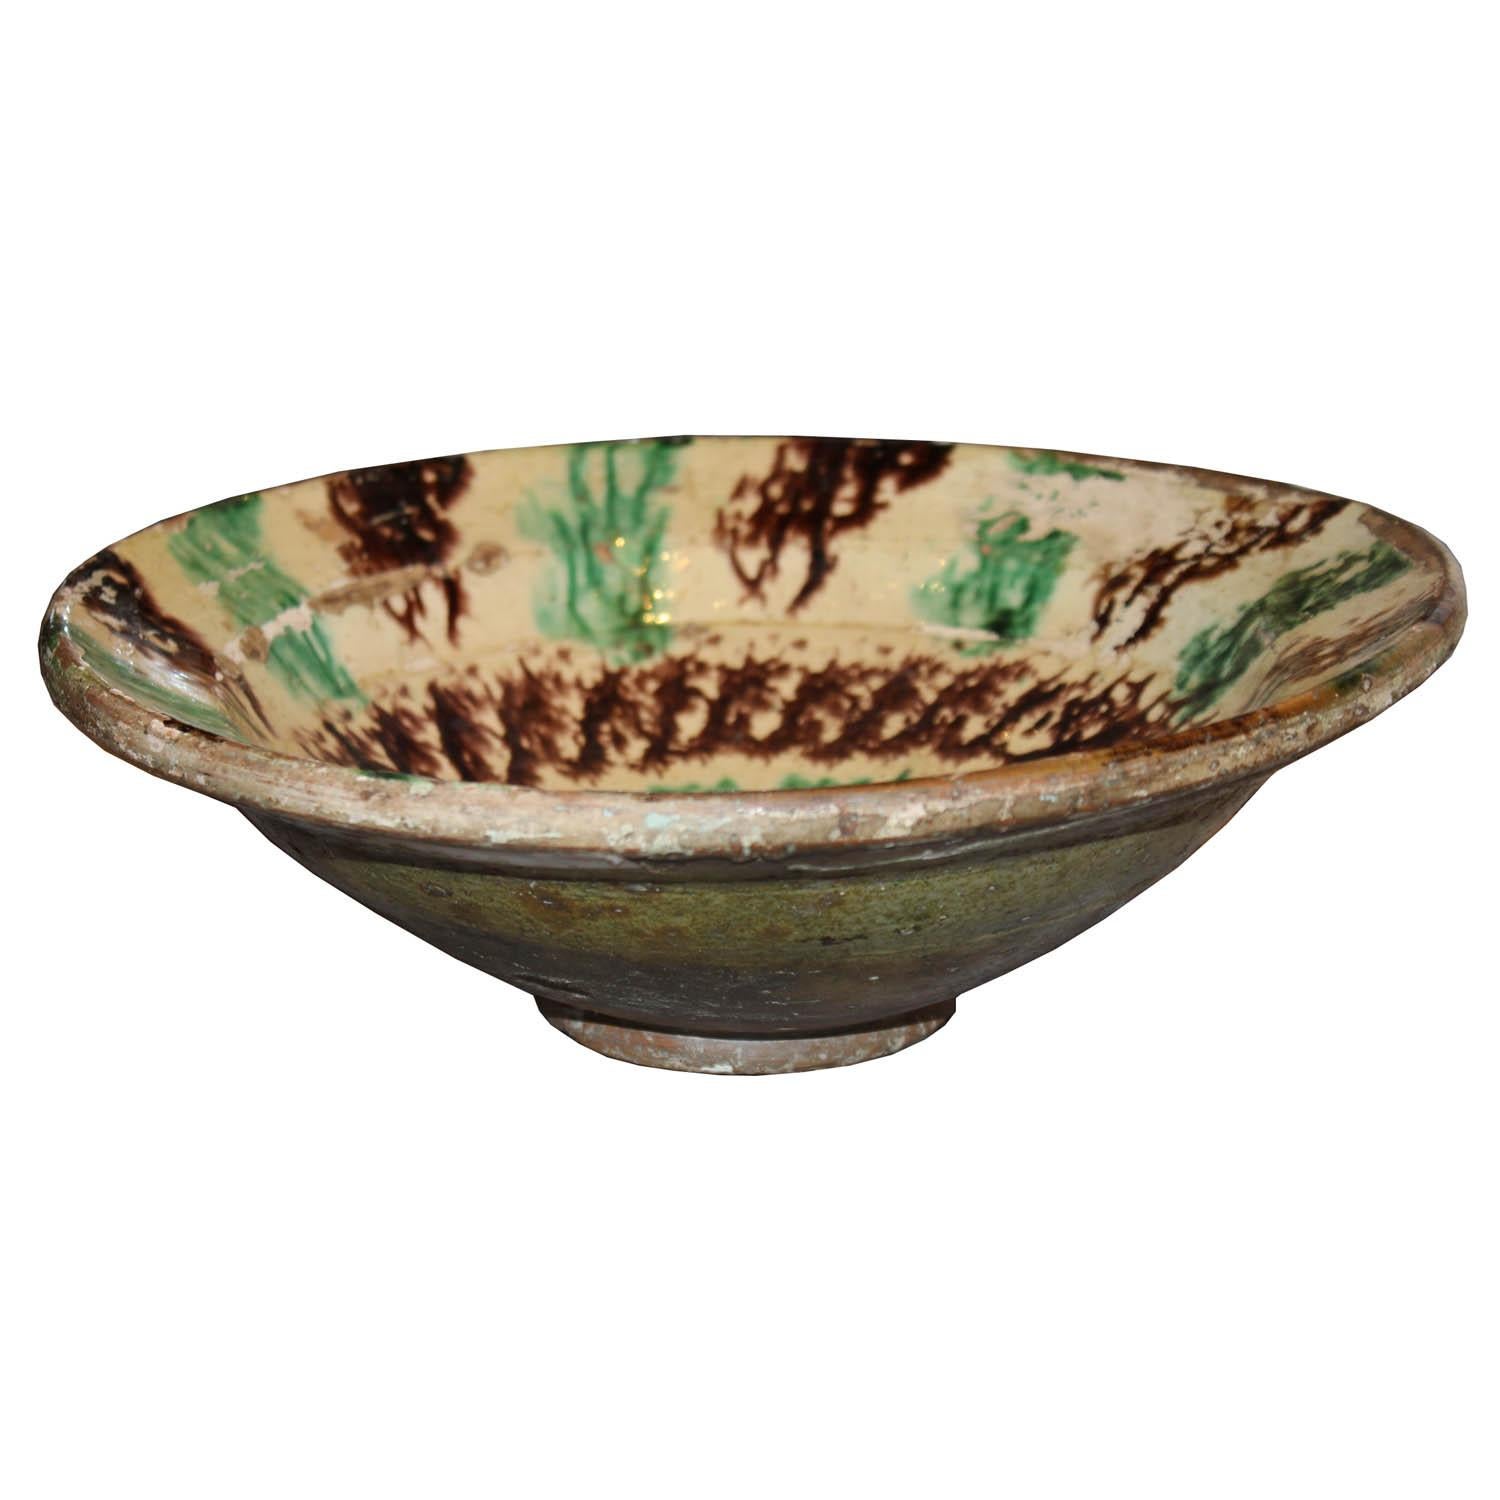 Vintage green and brown glazed ceramic bowl originally used for food would be a nice accessory on a coffee table or on a bookshelf.